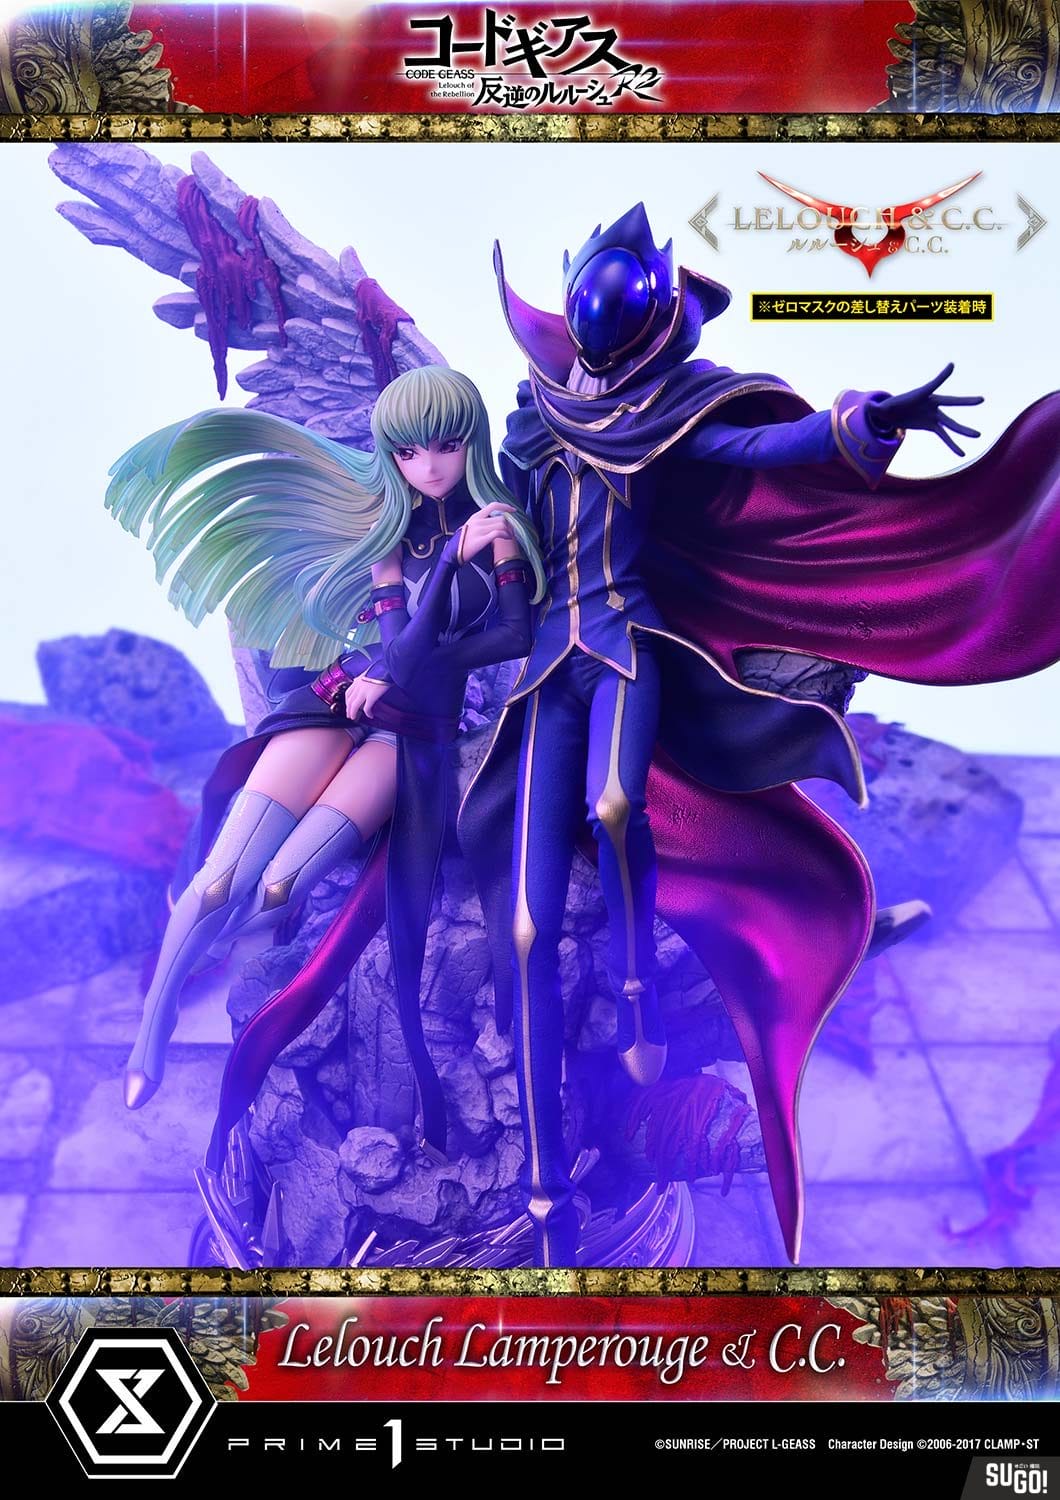 1/6 Sixth Scale Statue: Lelouch Lamperouge Code Geass Lelouch of the  Rebellion R2 Statue 1/6 Scale by Prime 1 Studio